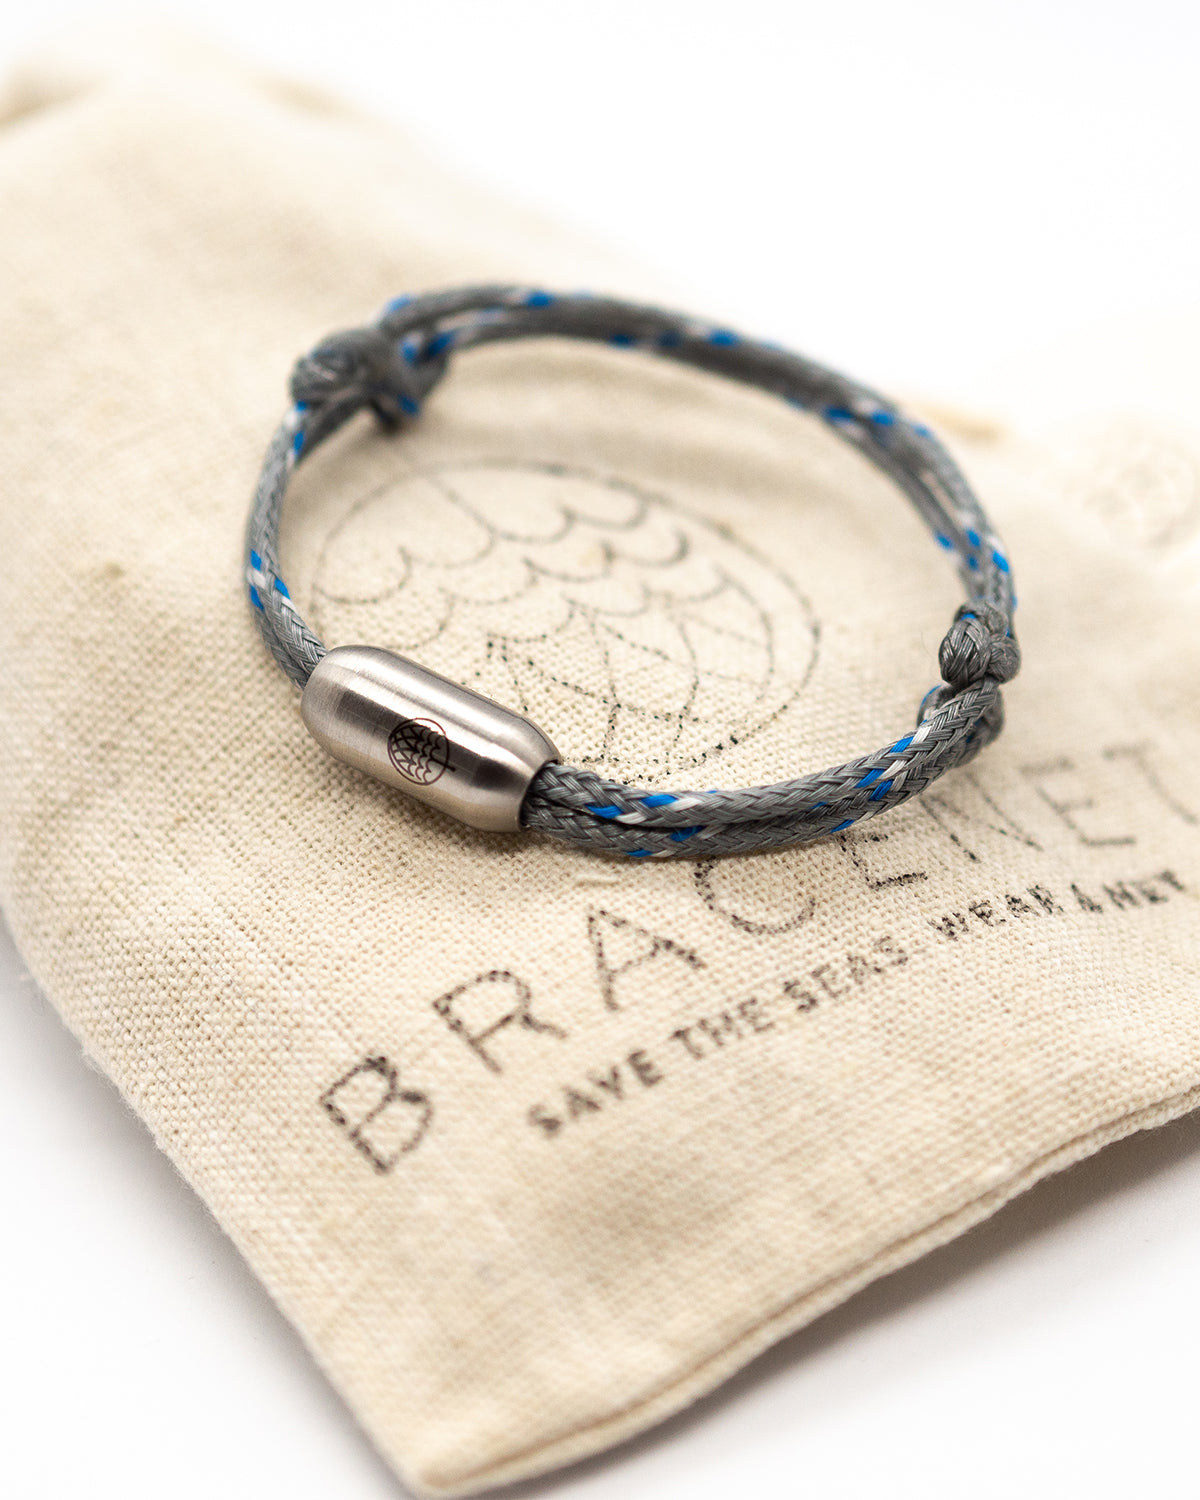 Bracelet in color grey with blue and white high lights and a silver clasp by Bracenet